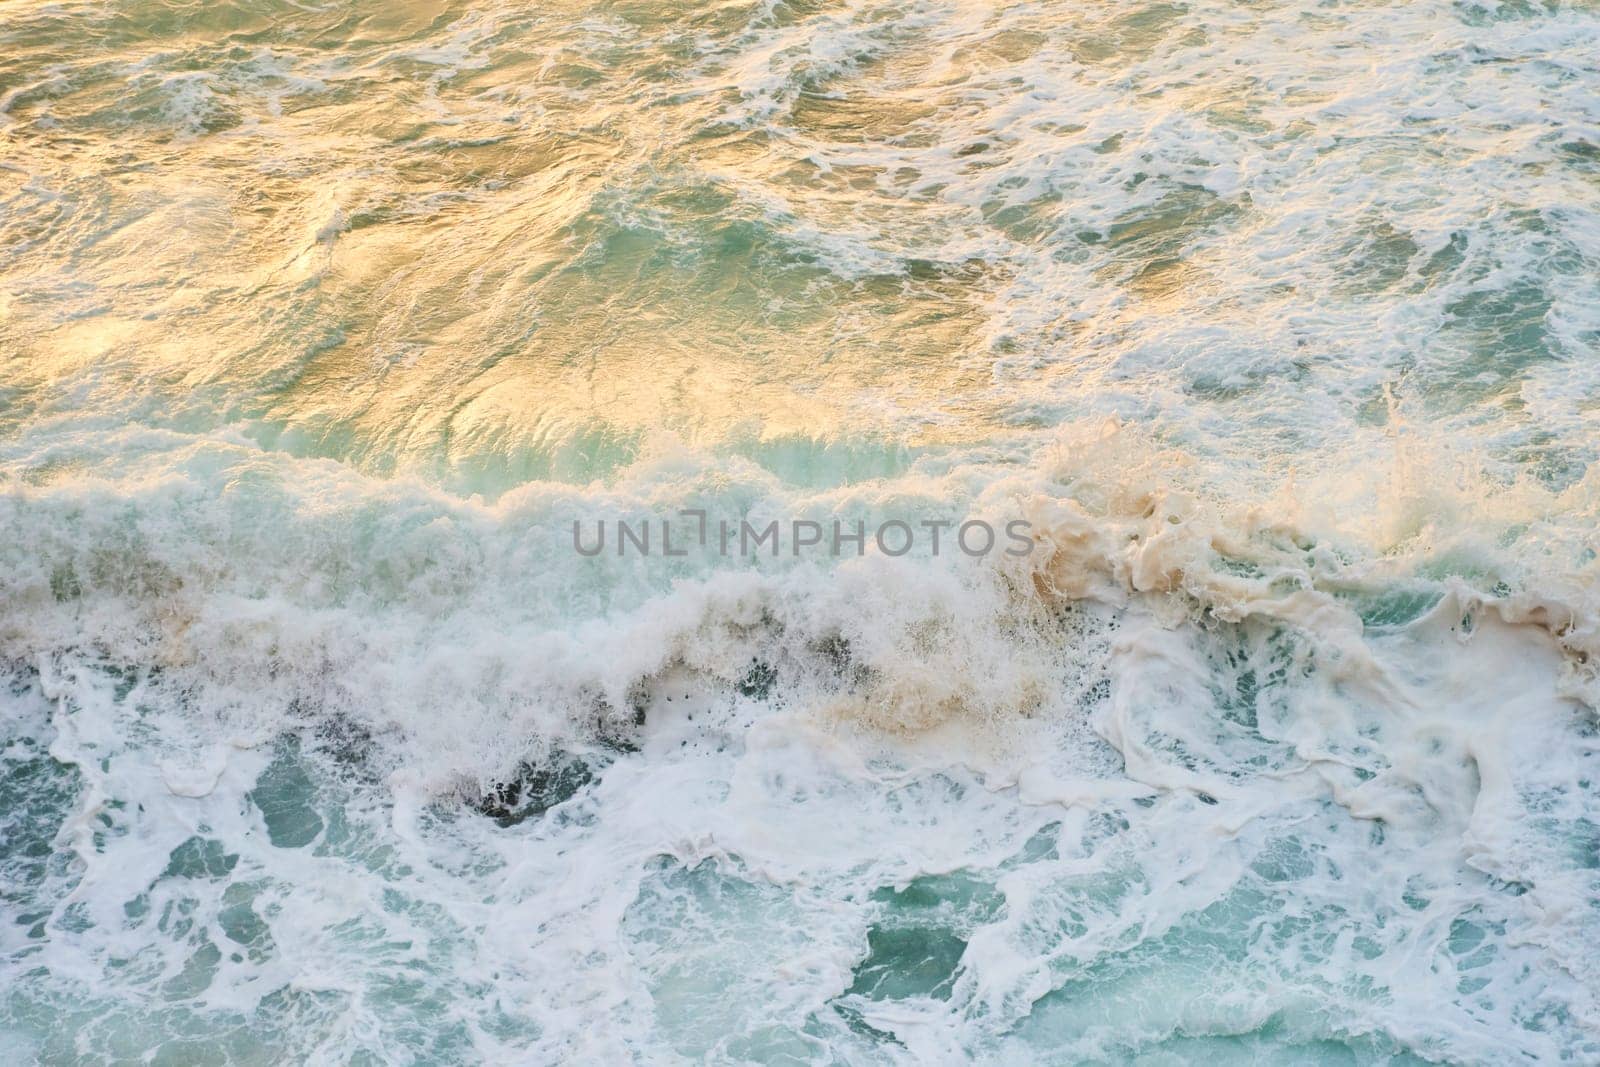 A closeup shot of the ocean with wind waves crashing onto the shore, creating a beautiful pattern of furrows in the water. The landscape is enhanced by cumulus clouds in the sky